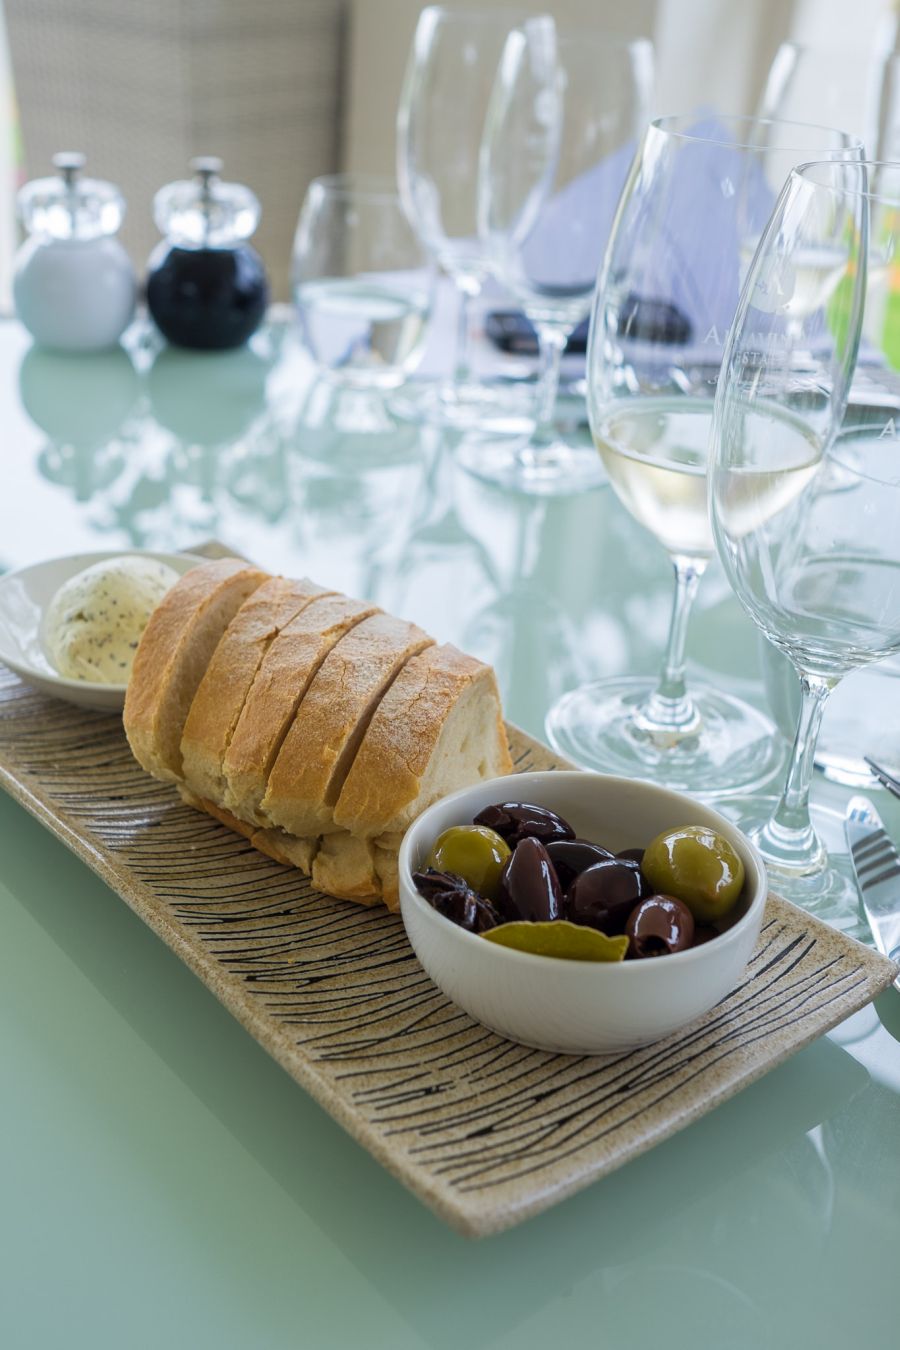 Marinated olives, freshly baked Aravina Estate bread, and whipped truffle butter